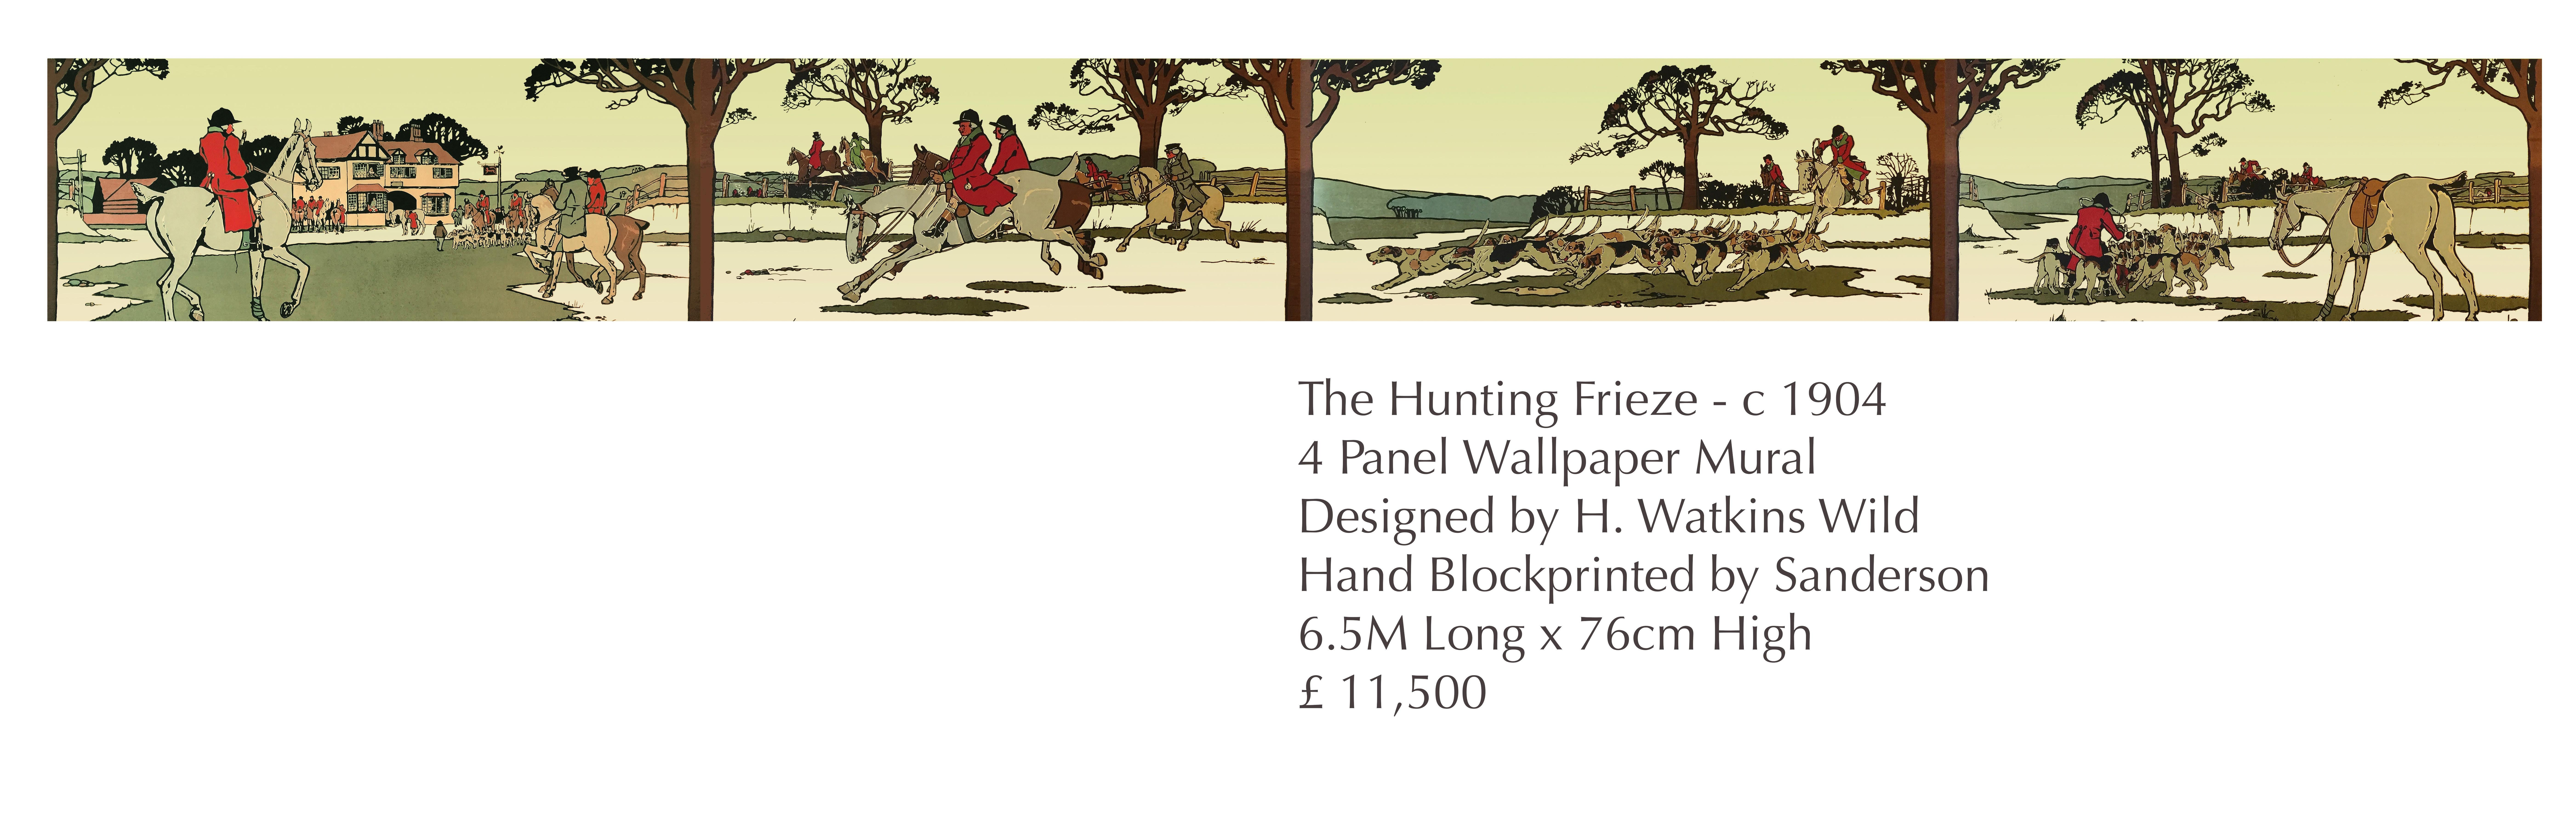 Hand-Crafted Hunting Scene, 4 Panel Hand Block Printed Frieze by H.Watkins Wild For Sale